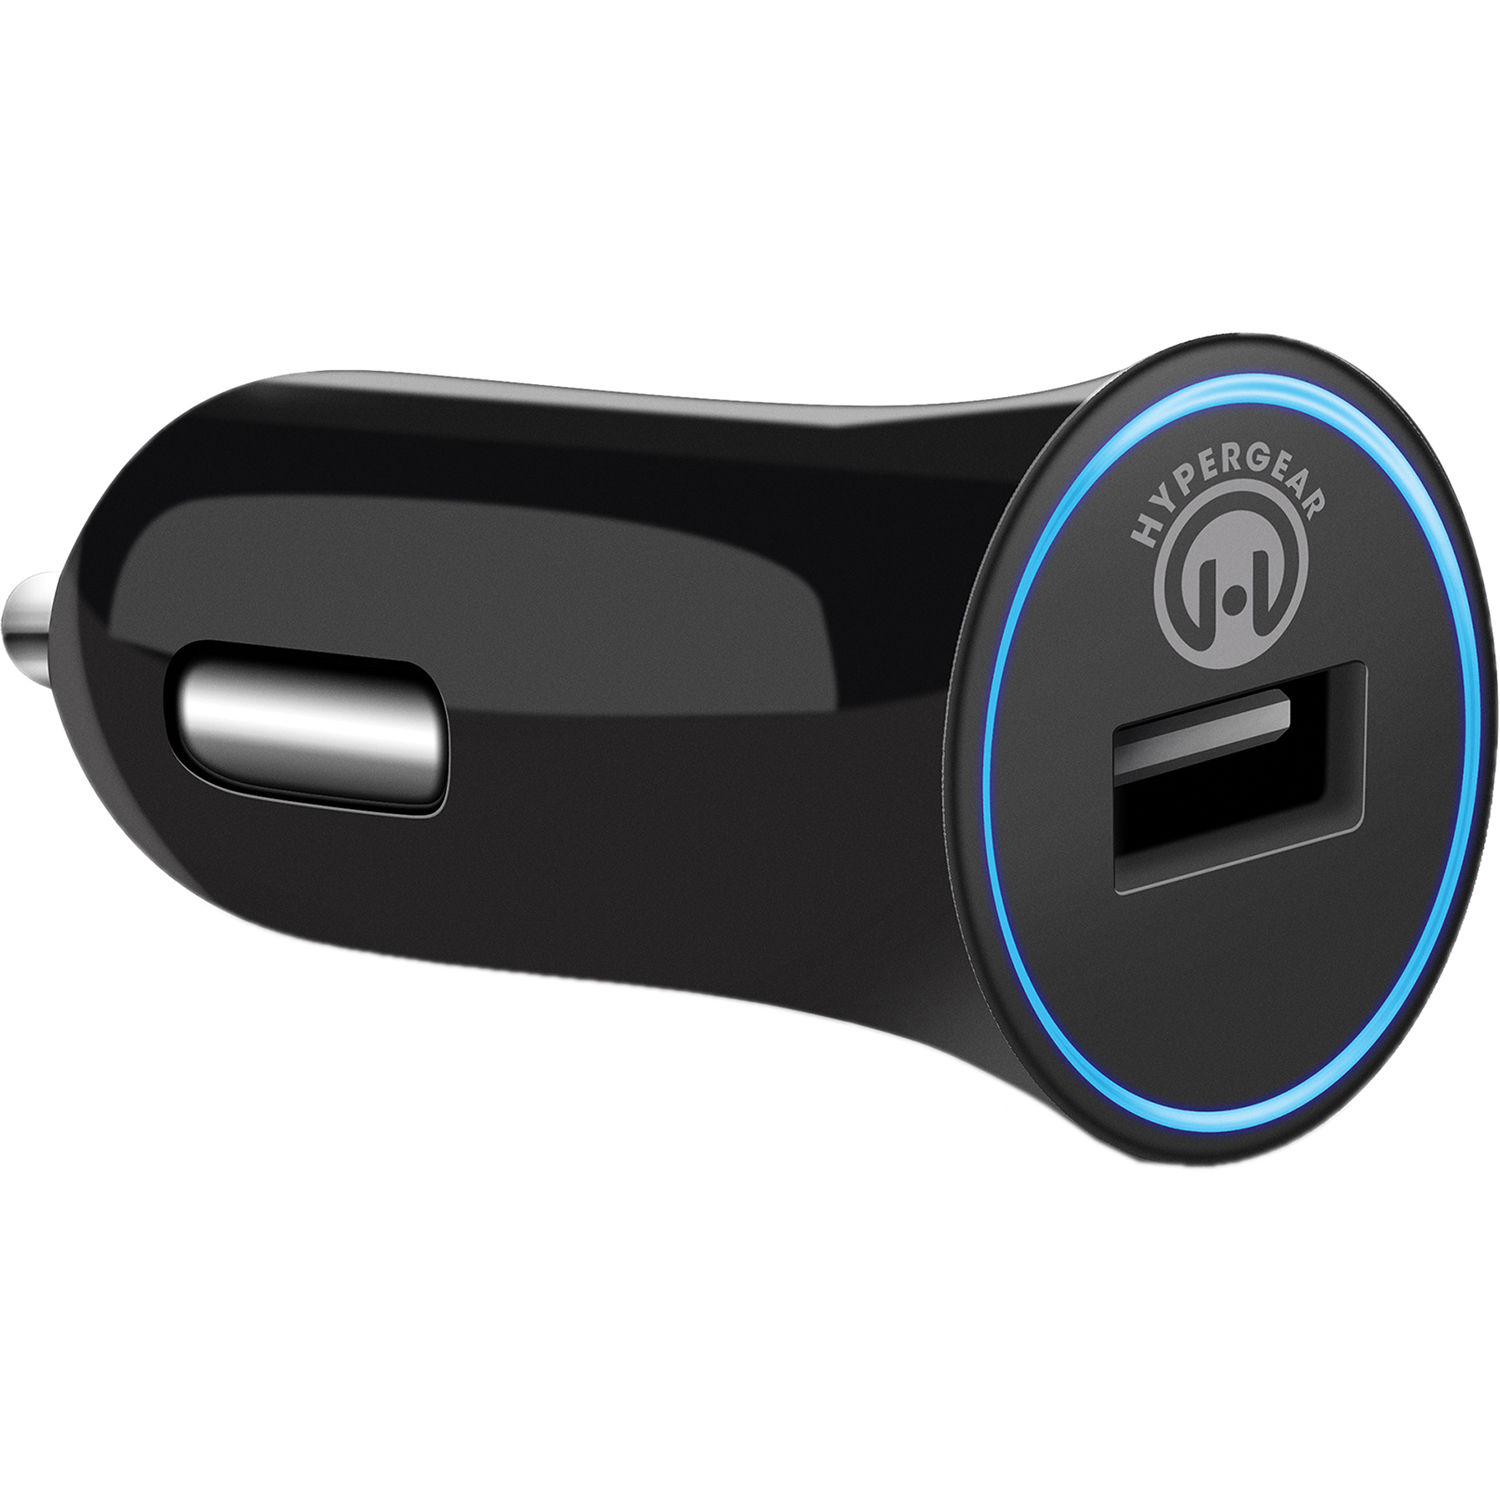 rapid car charger